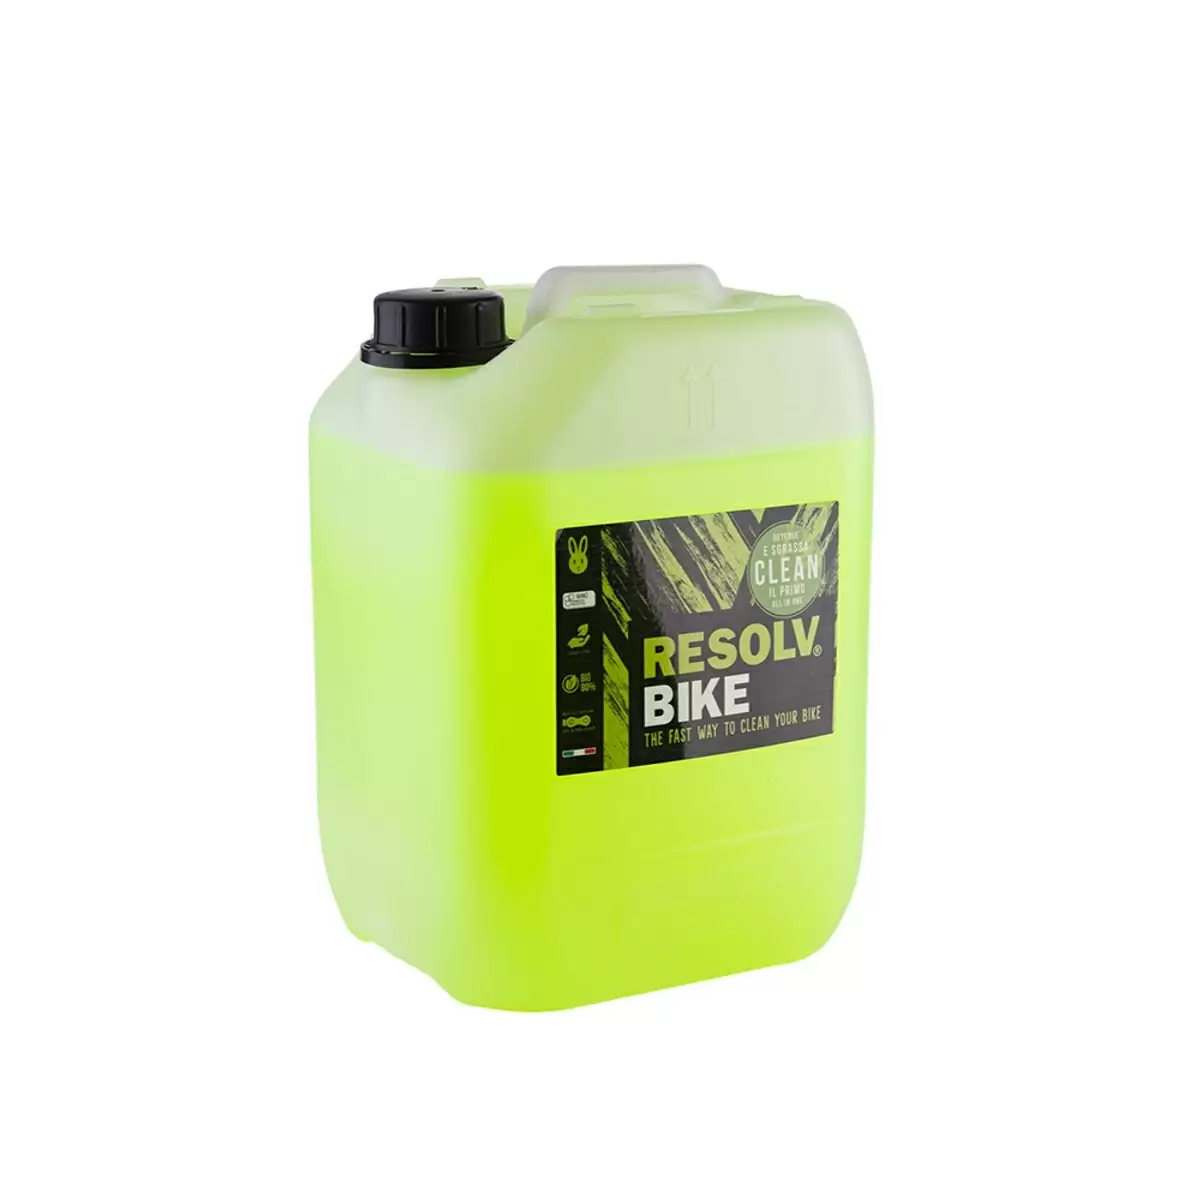 Clean Detergent For Bike Cleaning 10L - image